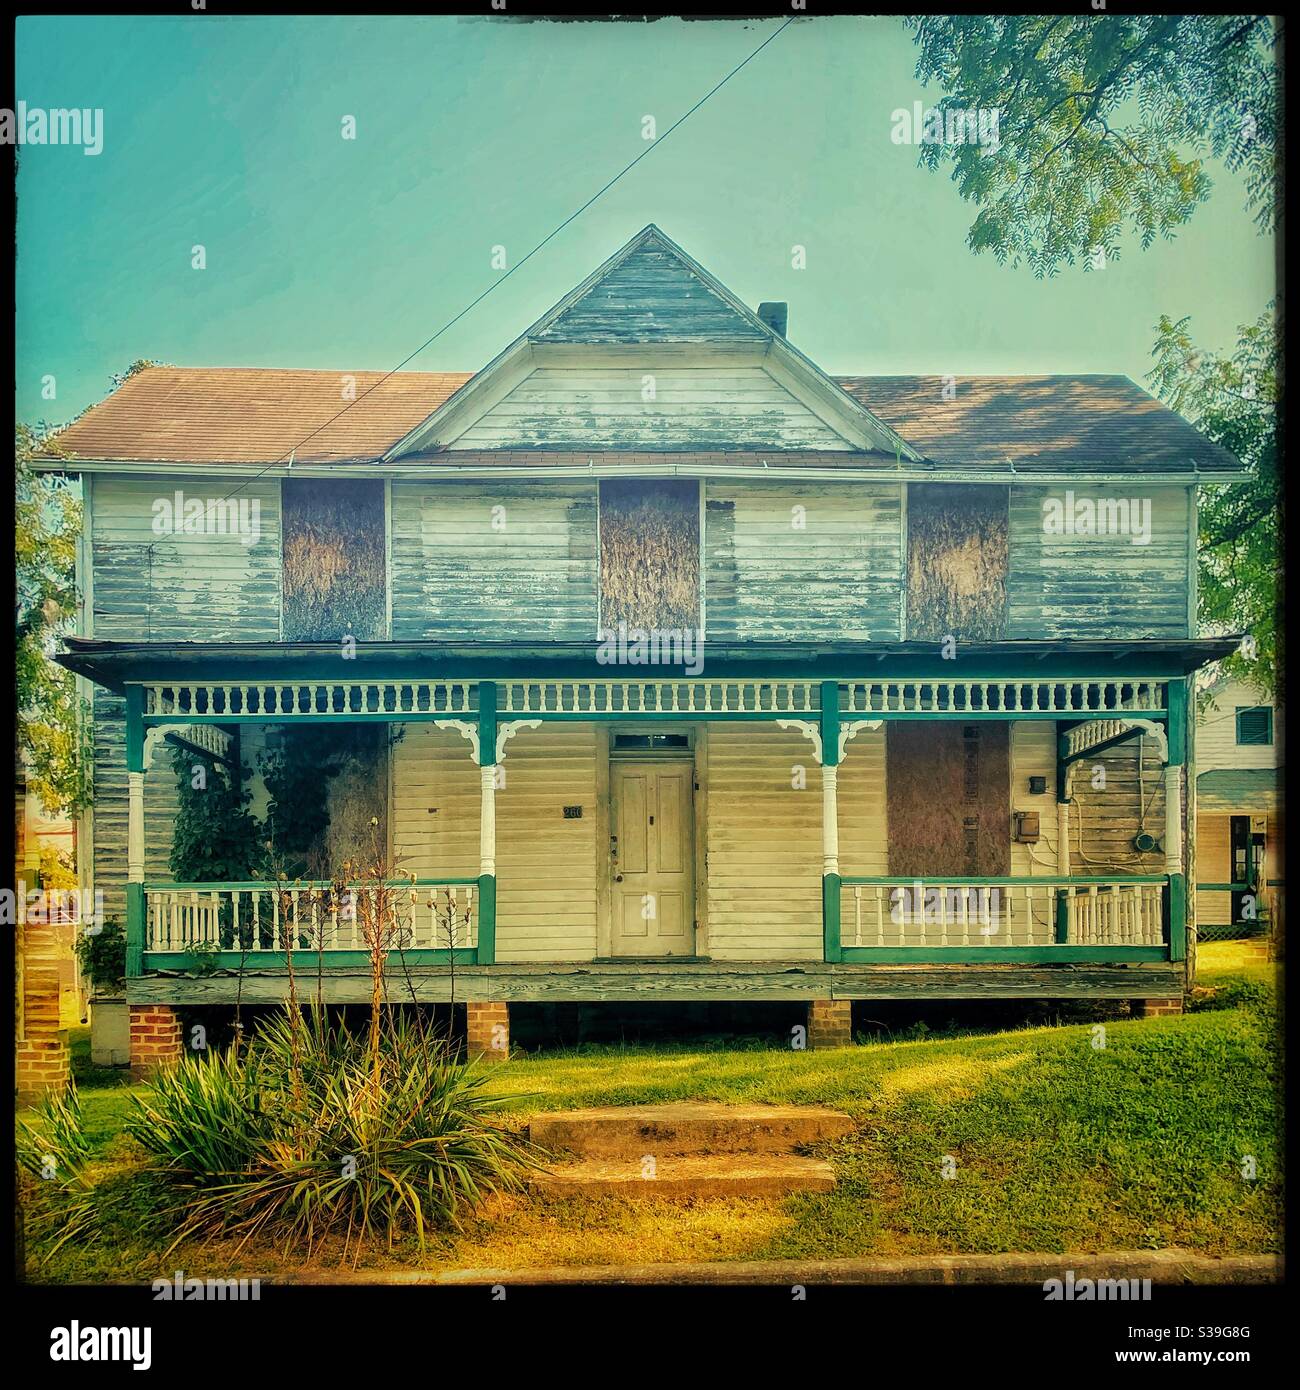 Old wooden house in Wytheville Virginia Stock Photo